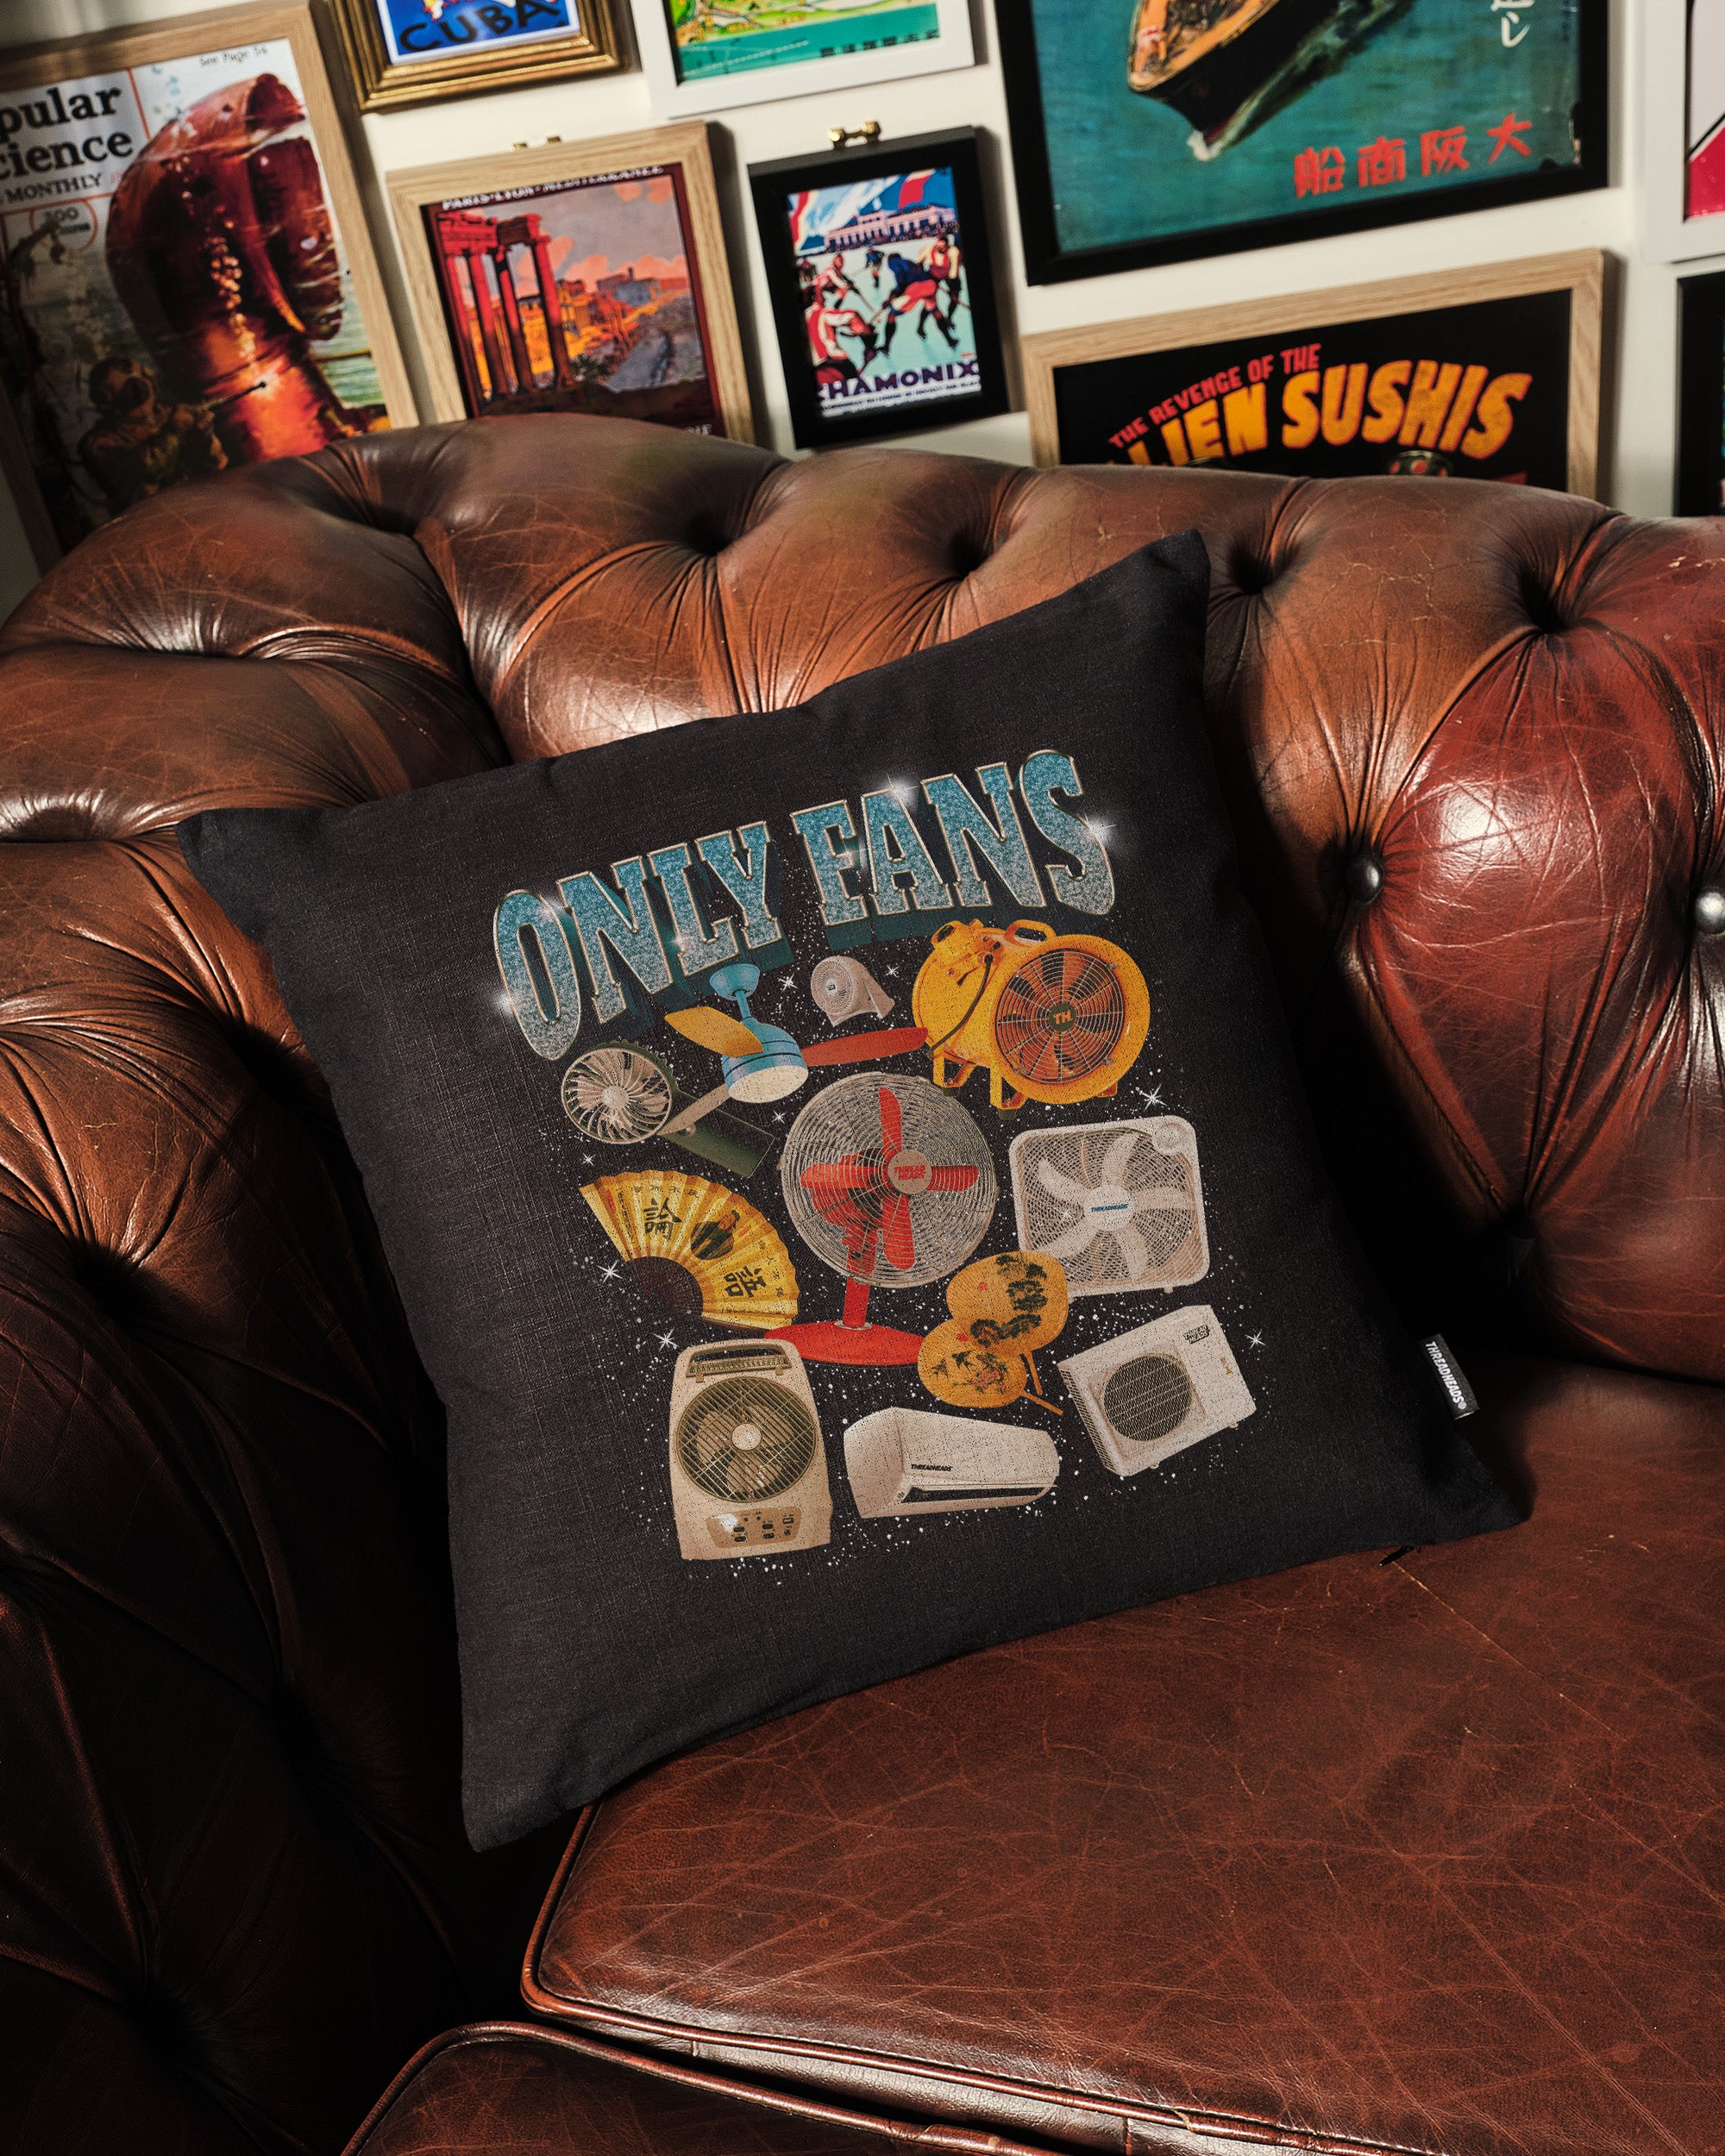 Only Fans Cushion